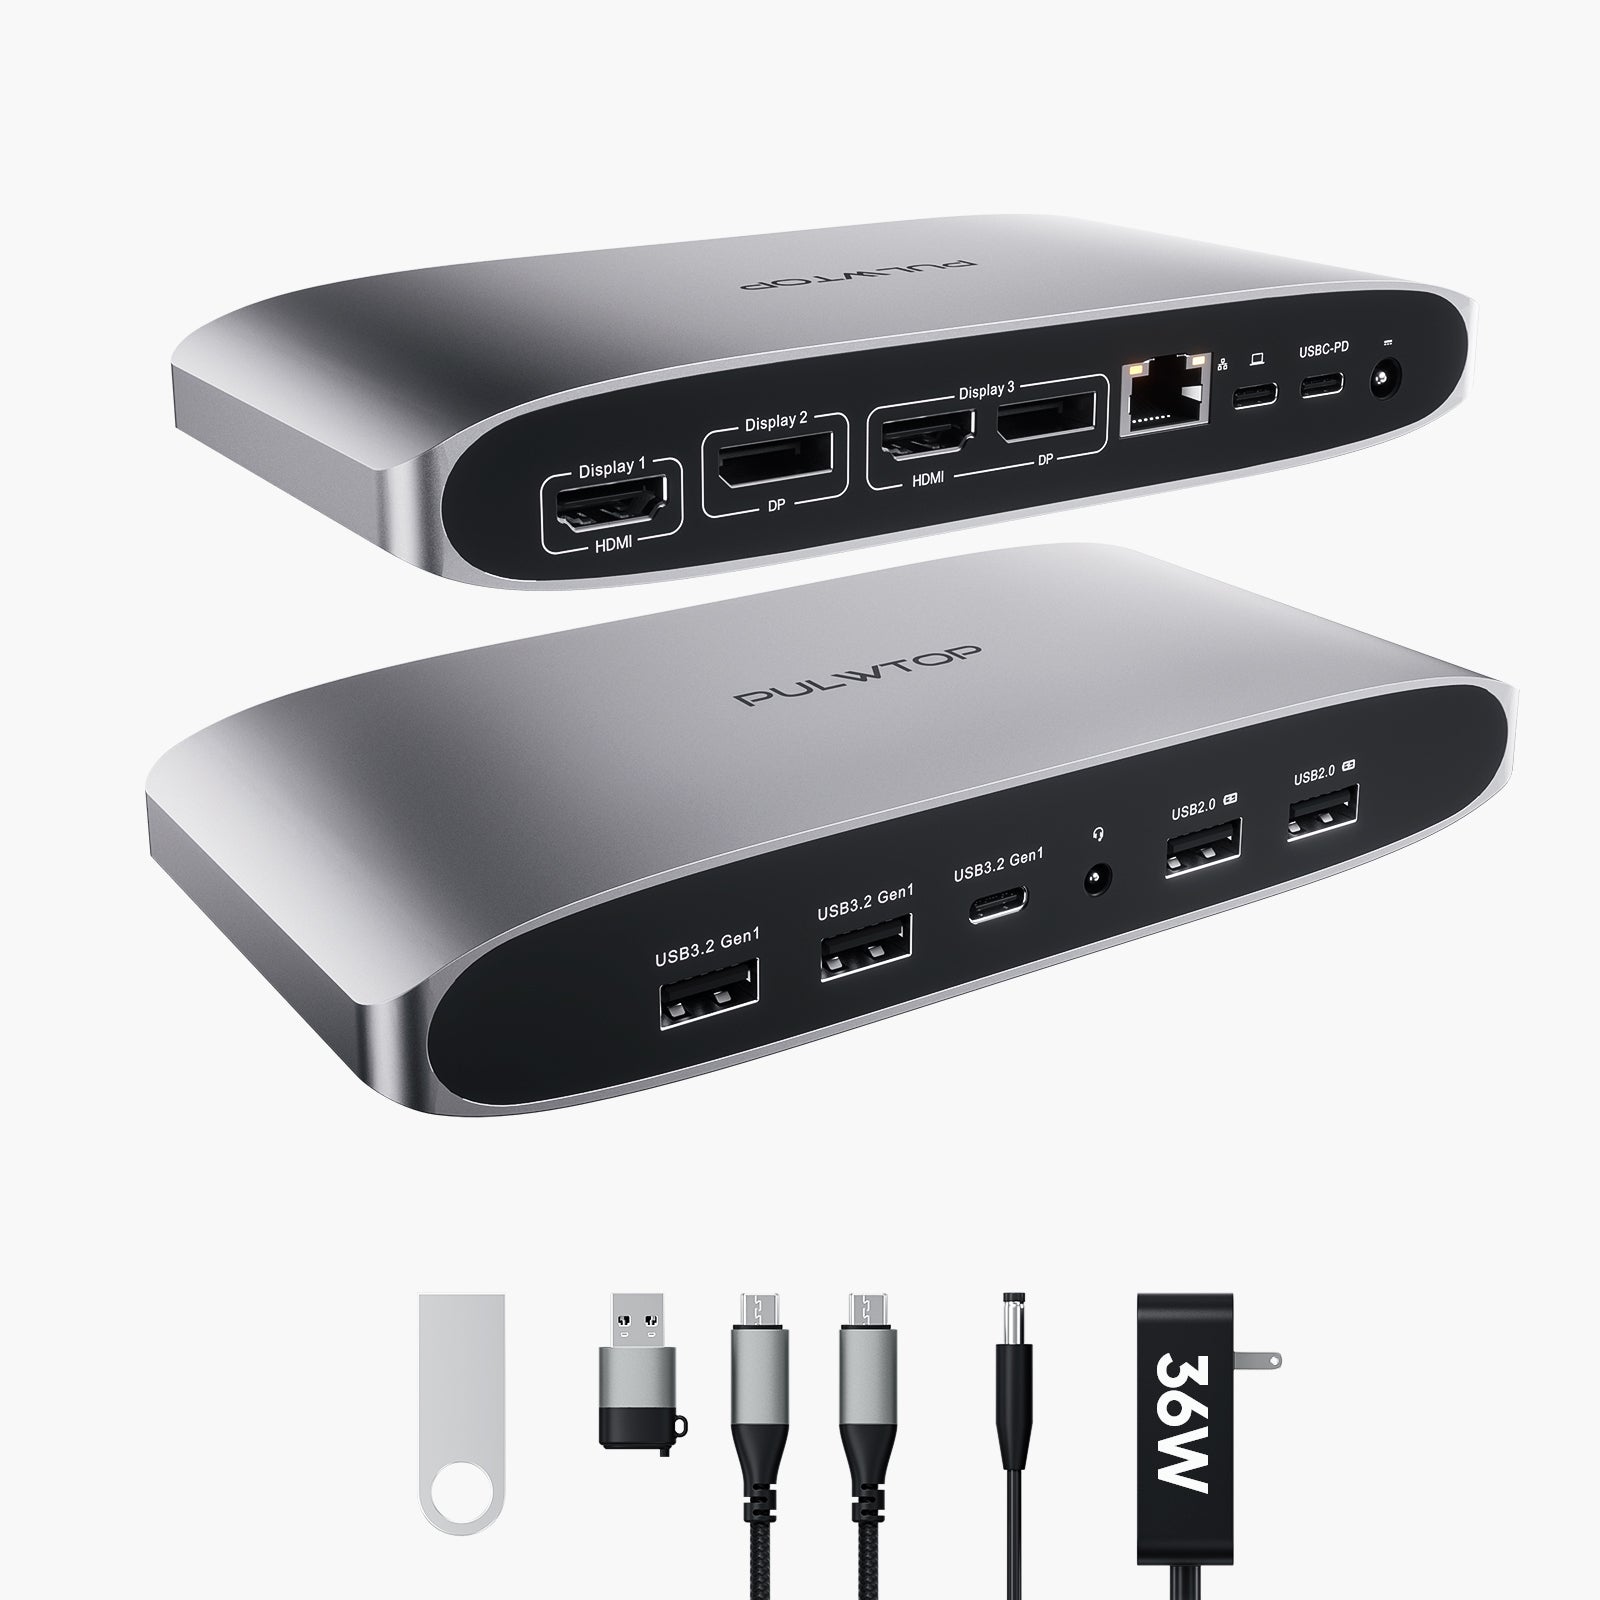 PULWTOP Displaylink Triple Monitor Universal Dock (14-in-1), USB C Laptop Dock with HDMI and DisplayPort, PD, USB-C Data, USBA, Ethernet, Audio